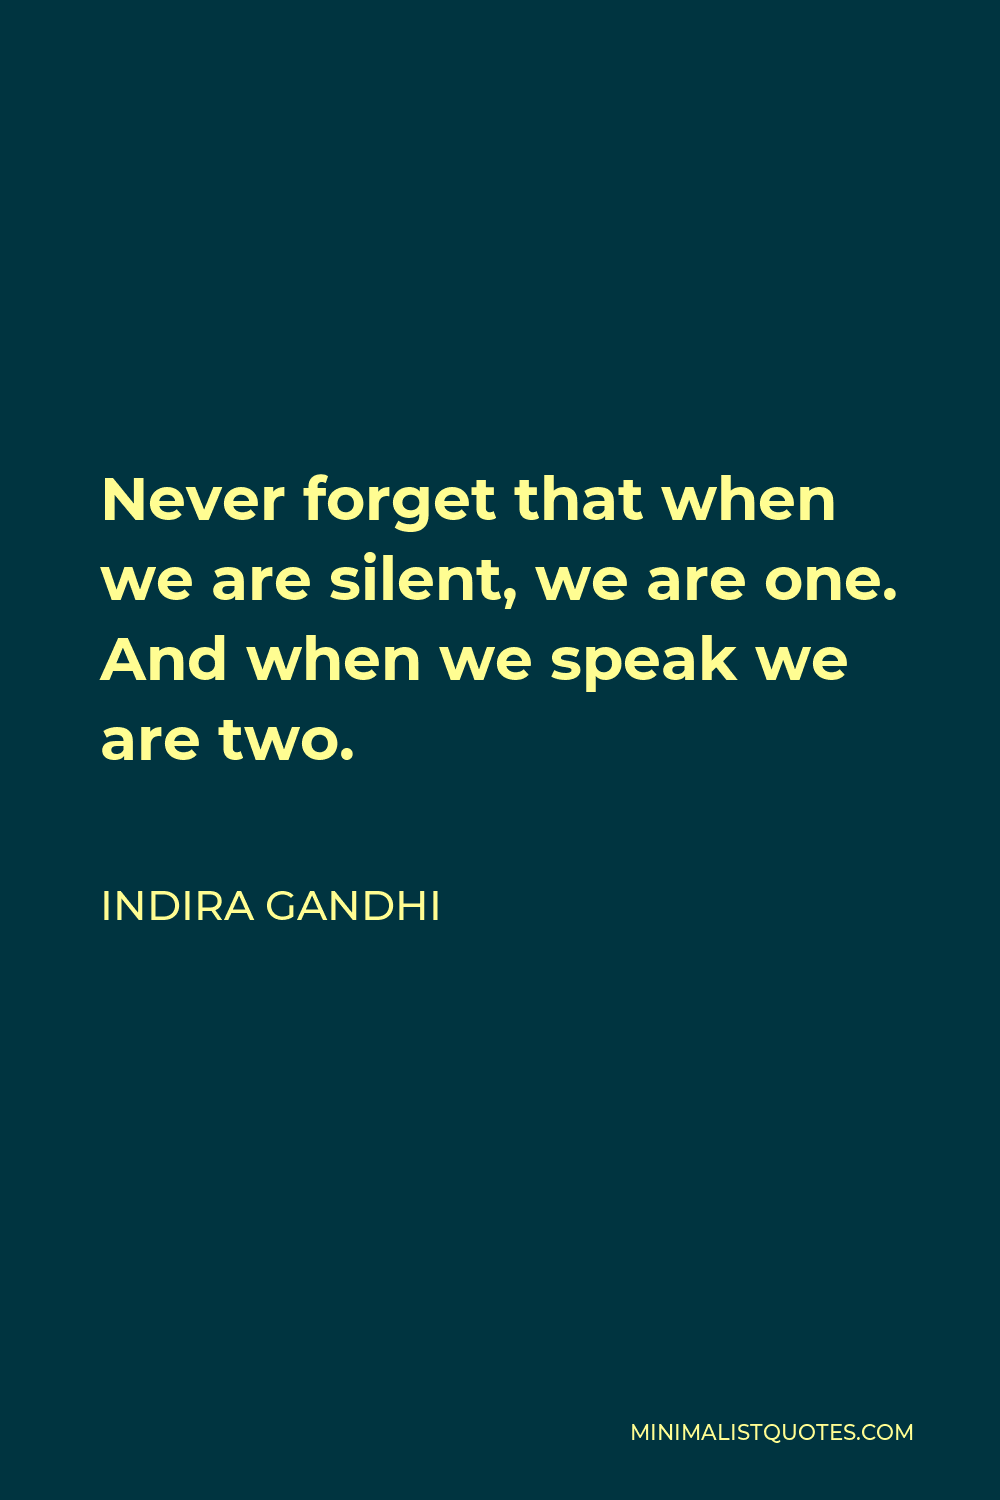 Indira Gandhi Quote - Never forget that when we are silent, we are one. And when we speak we are two.